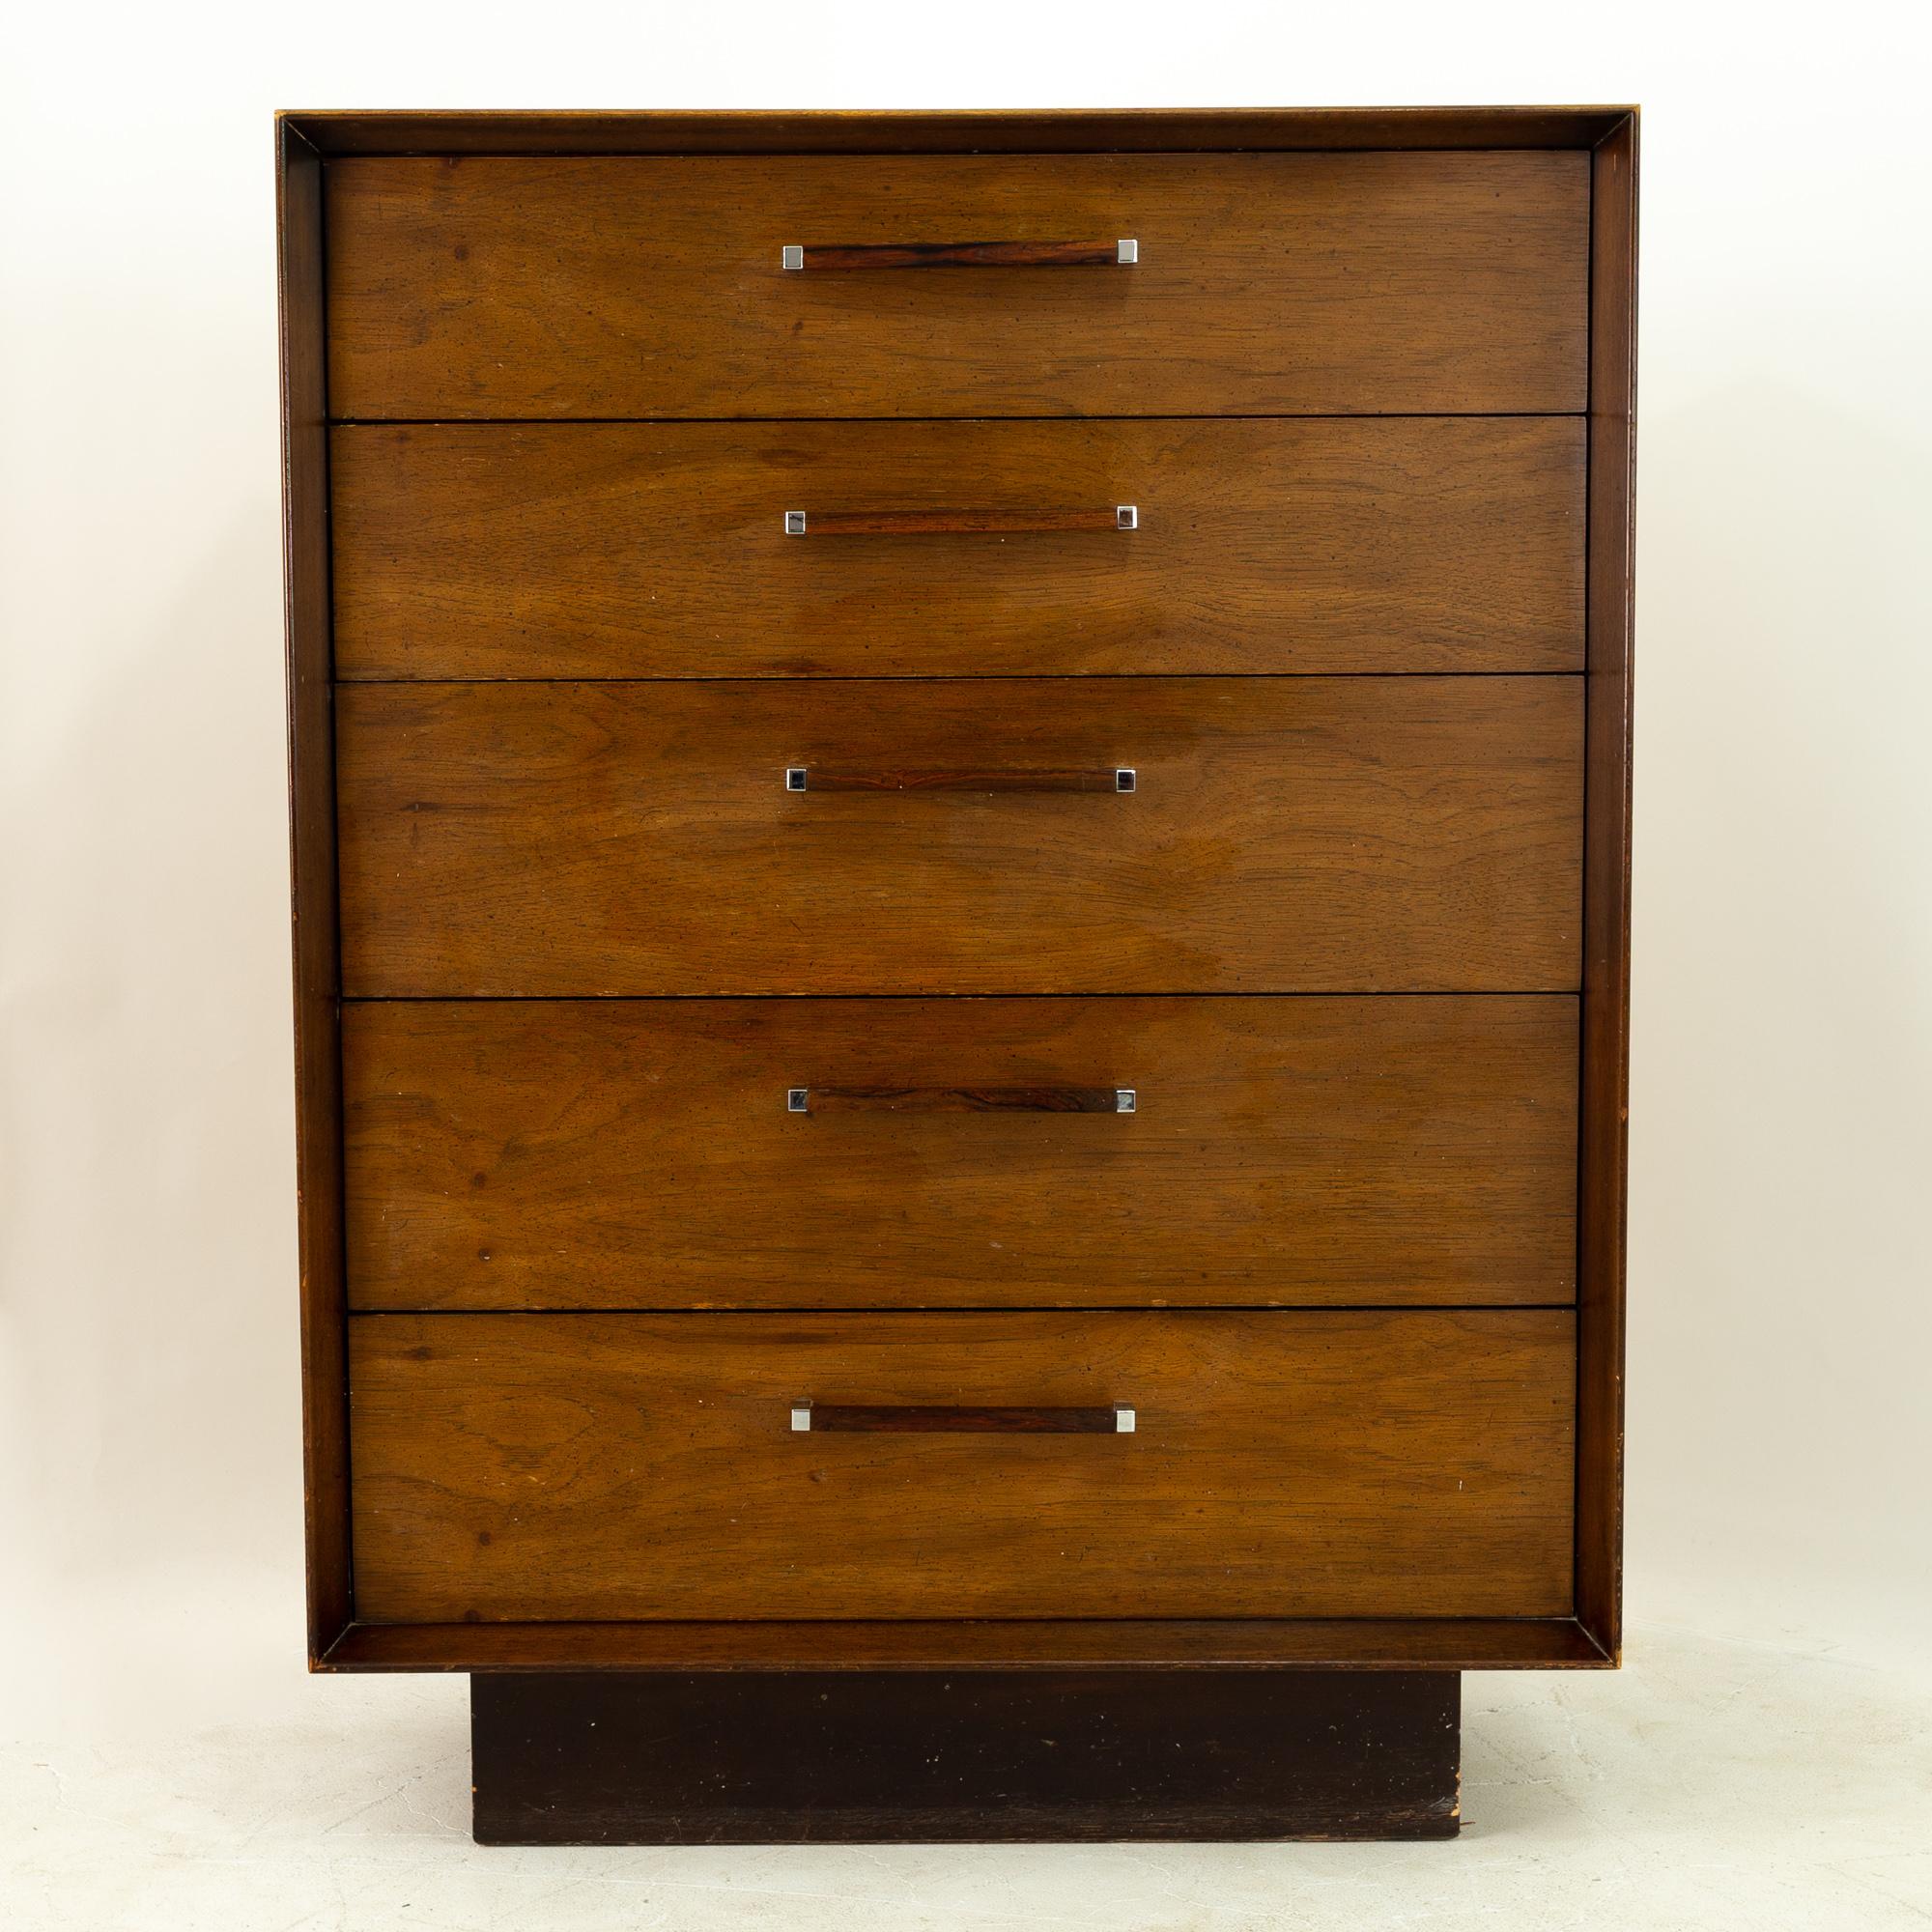 Lane tower suite mid century walnut rosewood inlay 5 drawer highboy dresser 

This dresser measures: 36 wide x 19 deep x 48 inches high

All pieces of furniture can be had in what we call restored vintage condition. That means the piece is